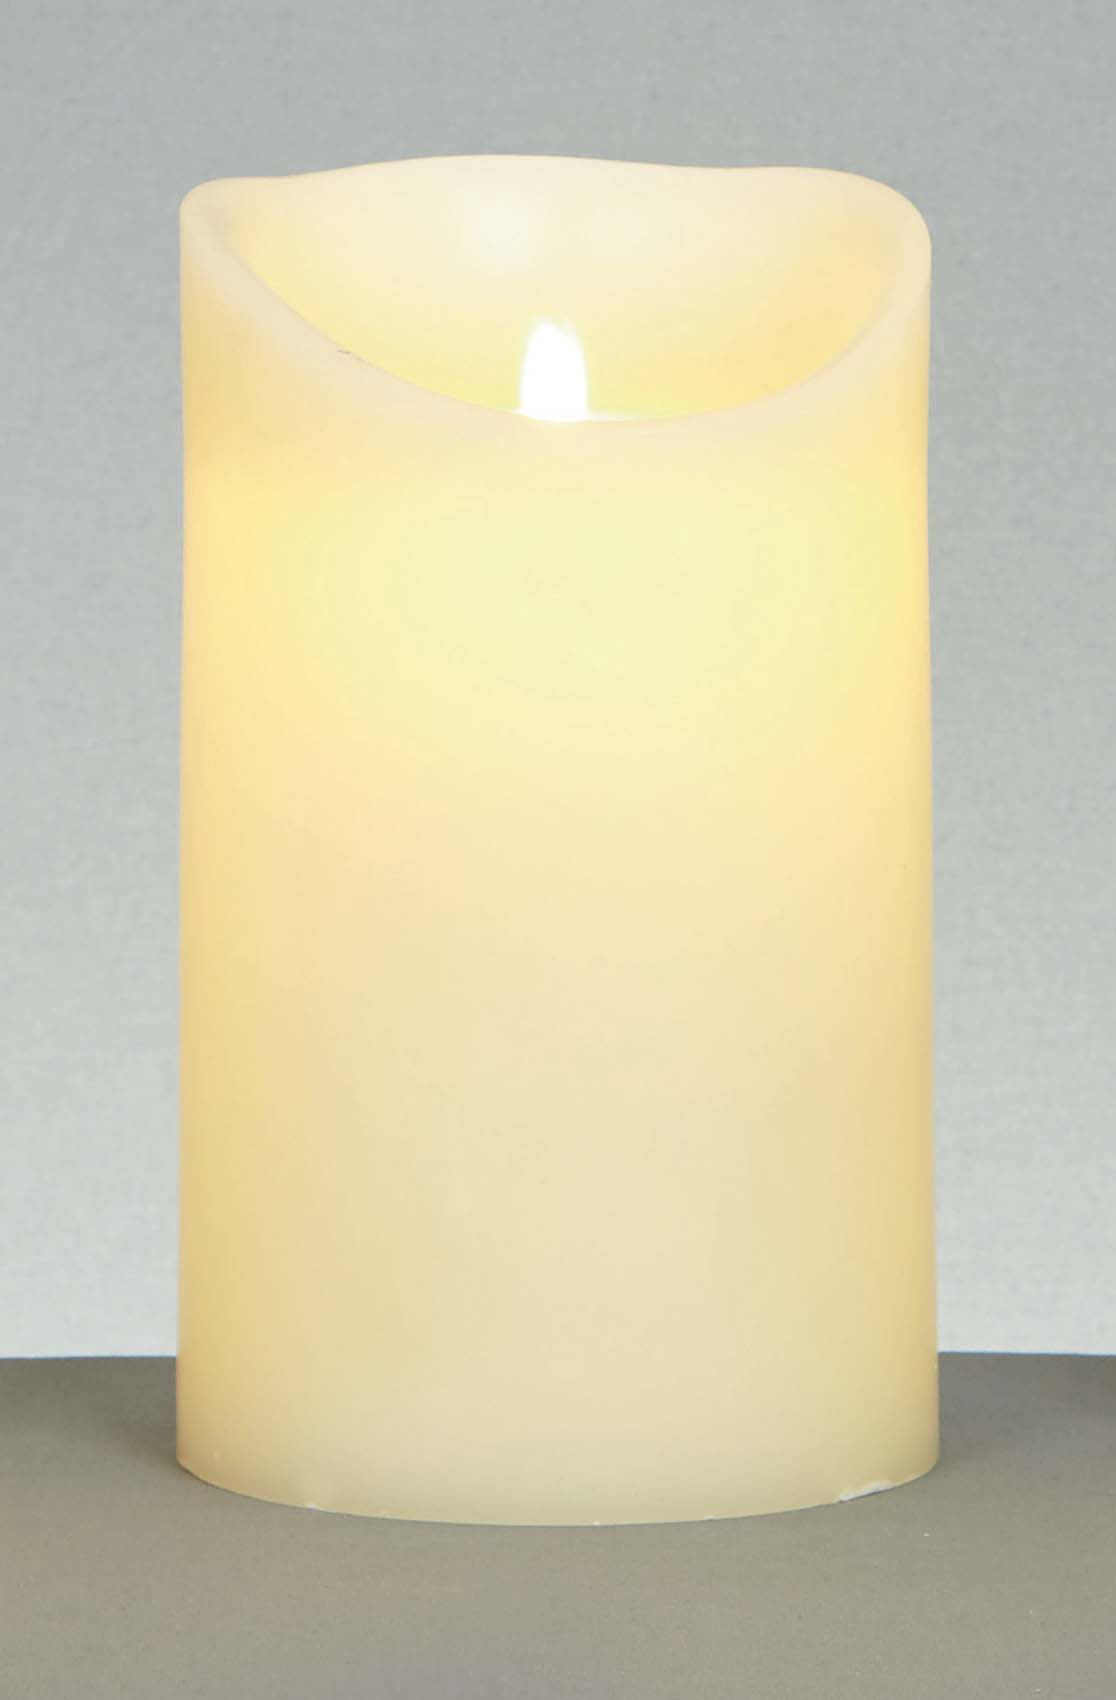 LARGE 25cm x 15cm Battery Operated Dancing Flame Candle with Timer in Cream